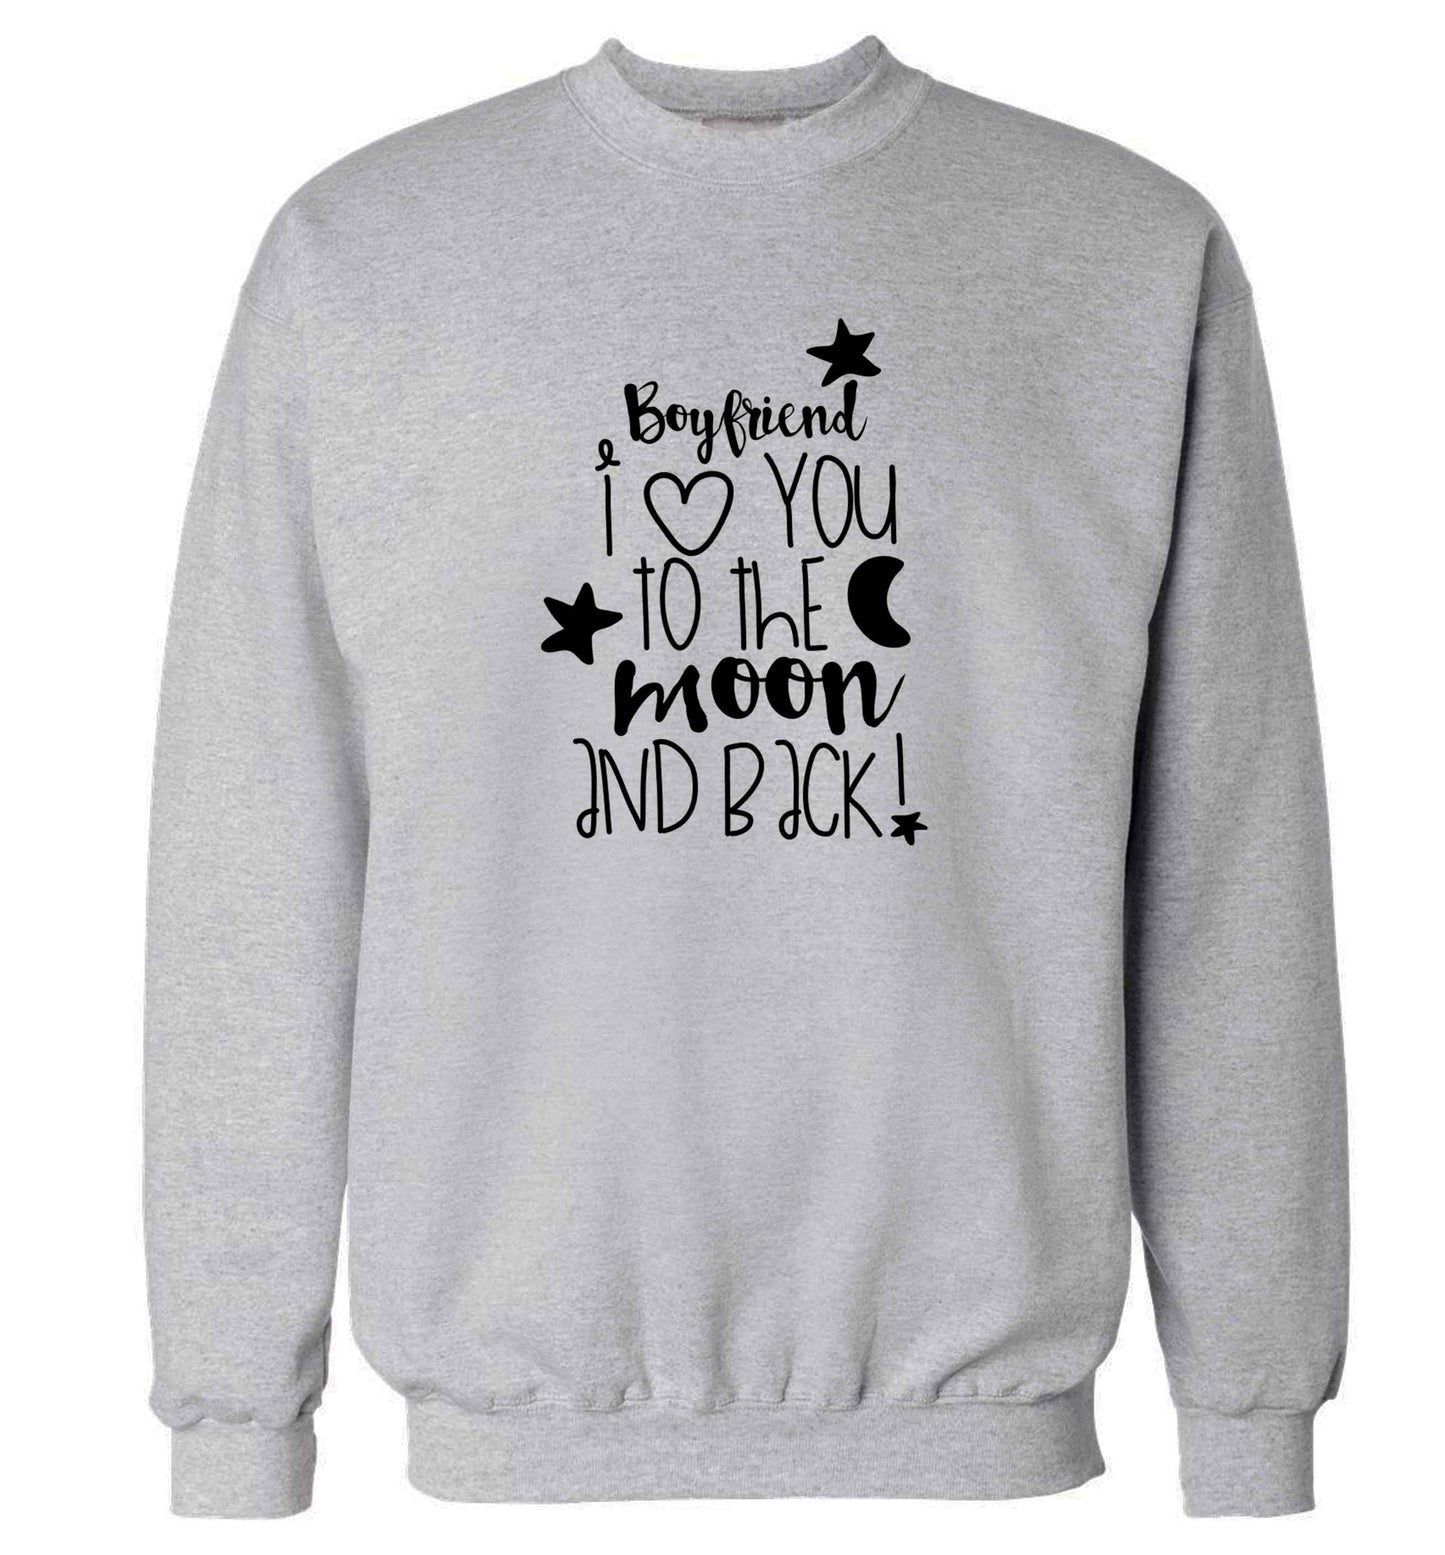 Boyfriend I love you to the moon and back adult's unisex grey sweater 2XL